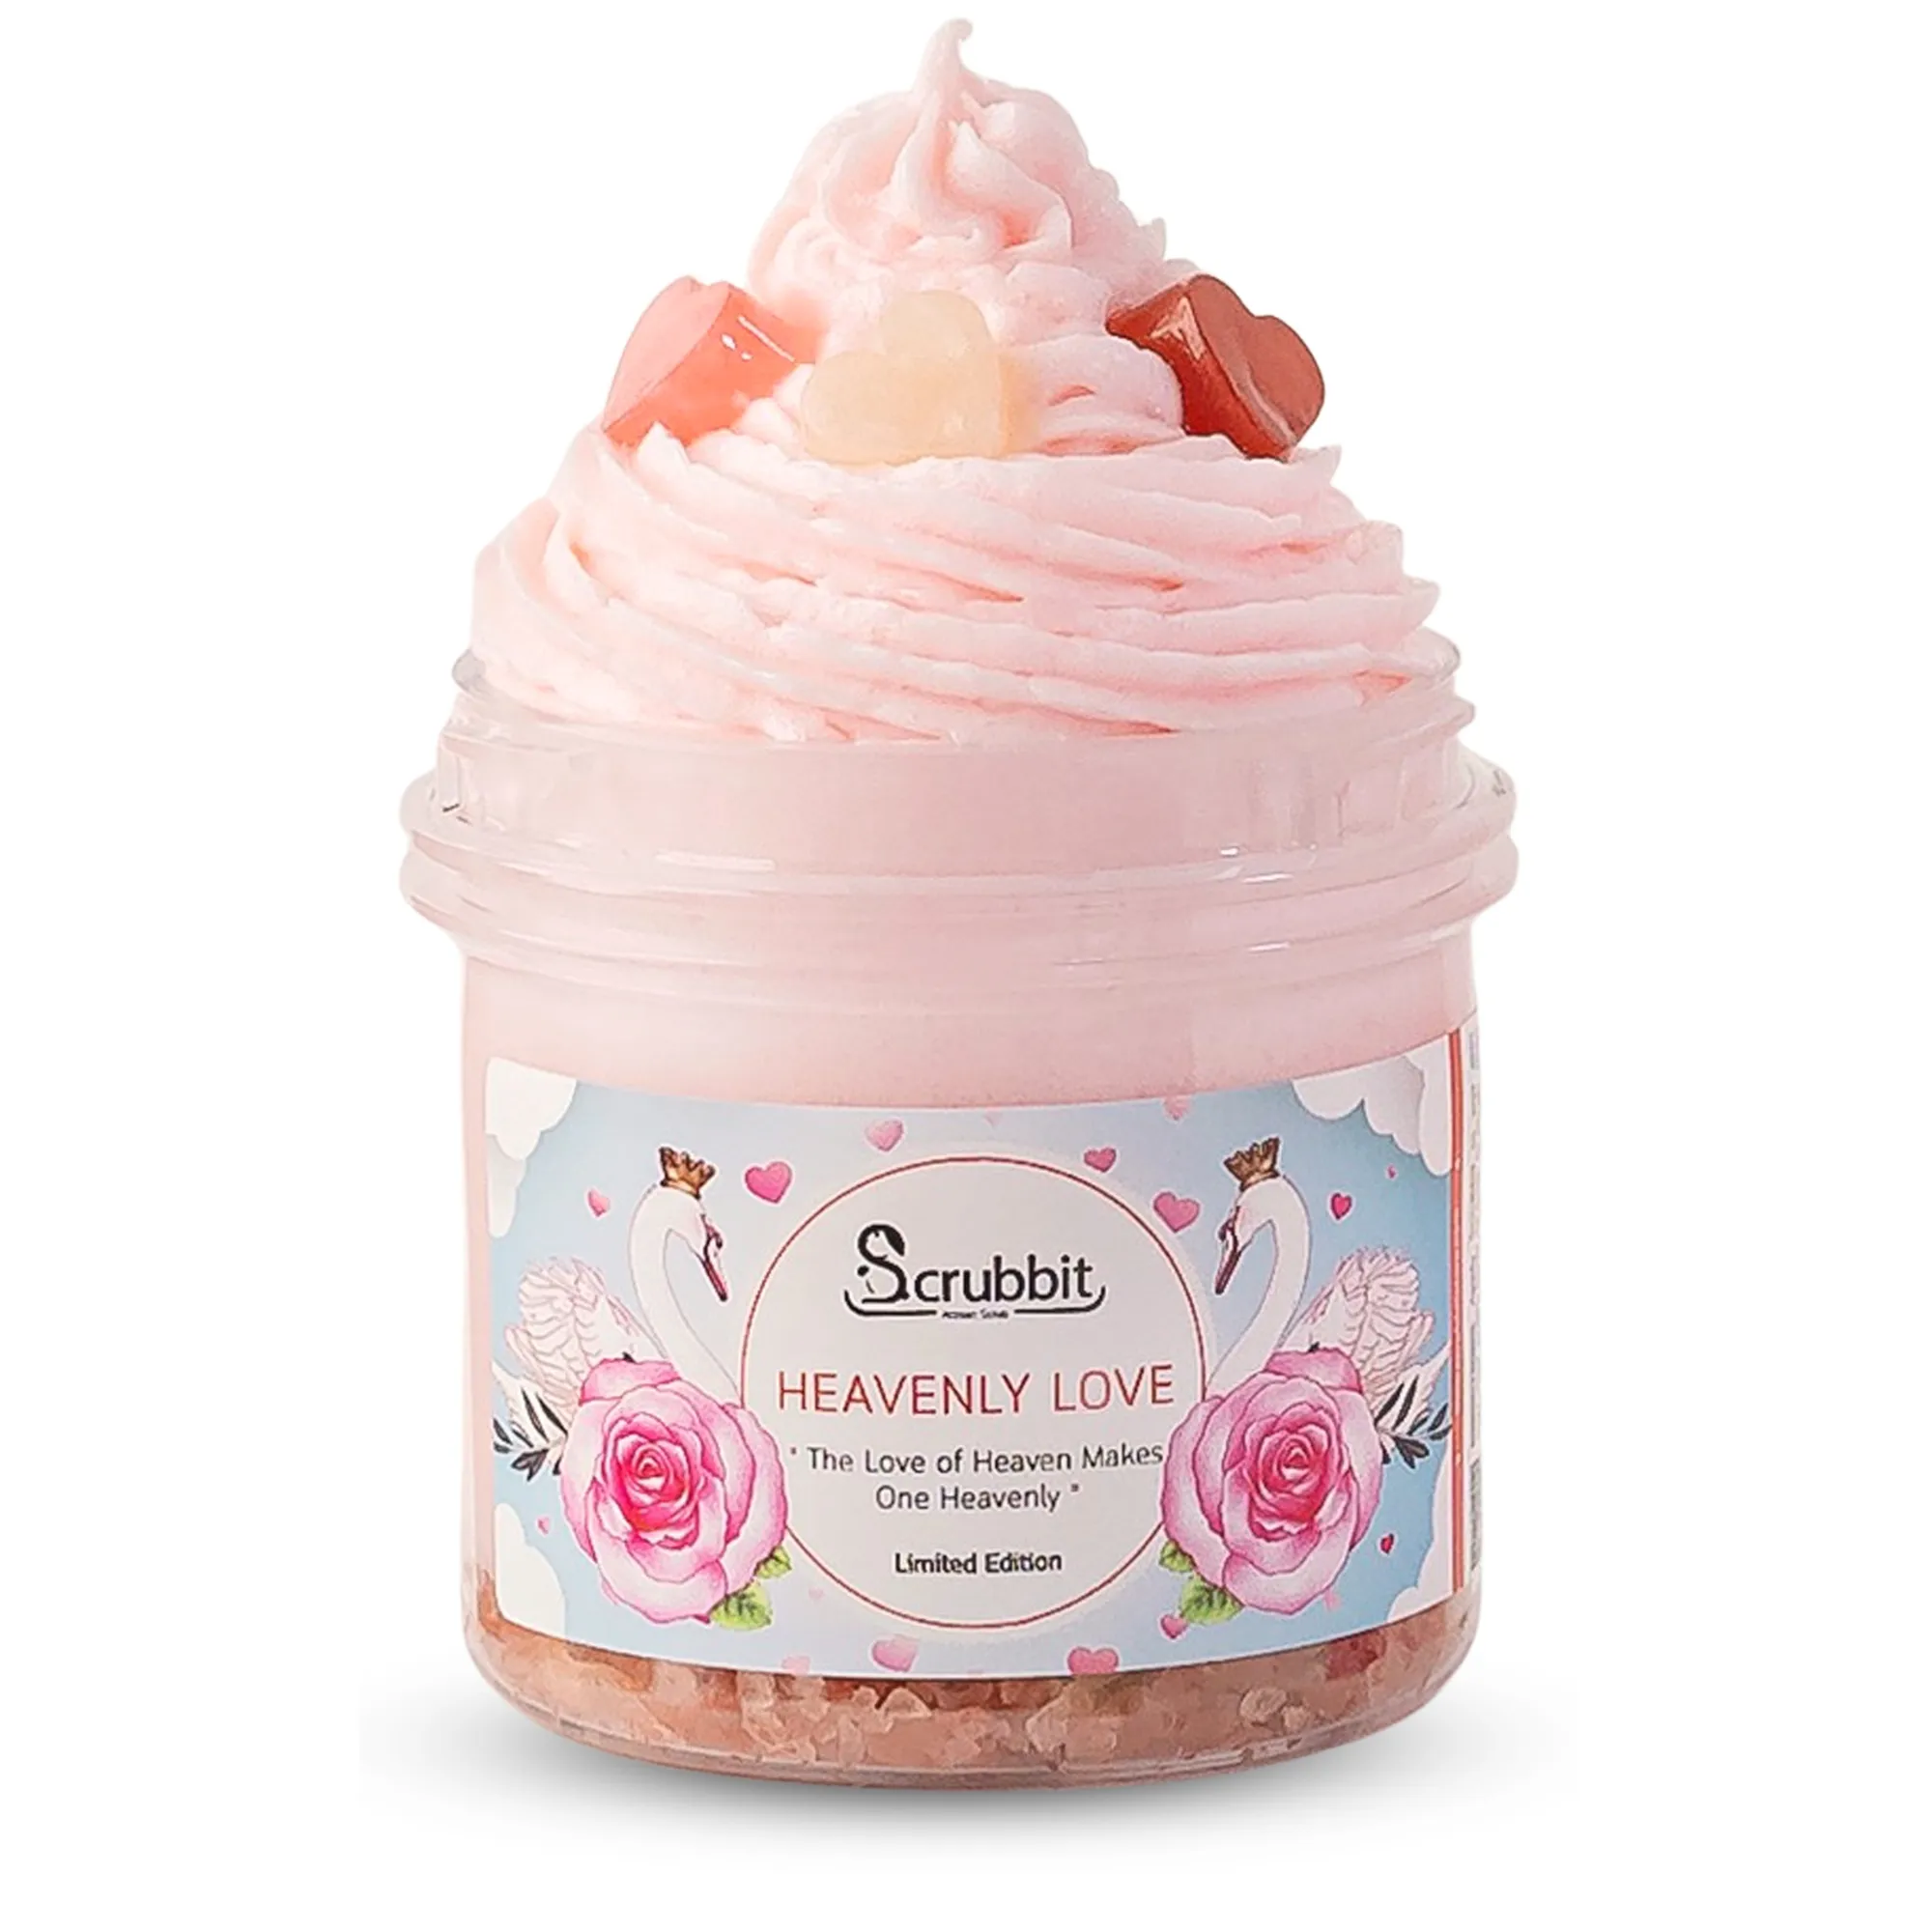 Body Scrub Heavenly Love Whipped Soap Body Scrub Soap Valentine Premium Quality From Thailand Suit For All Skin Type 6 OZ.